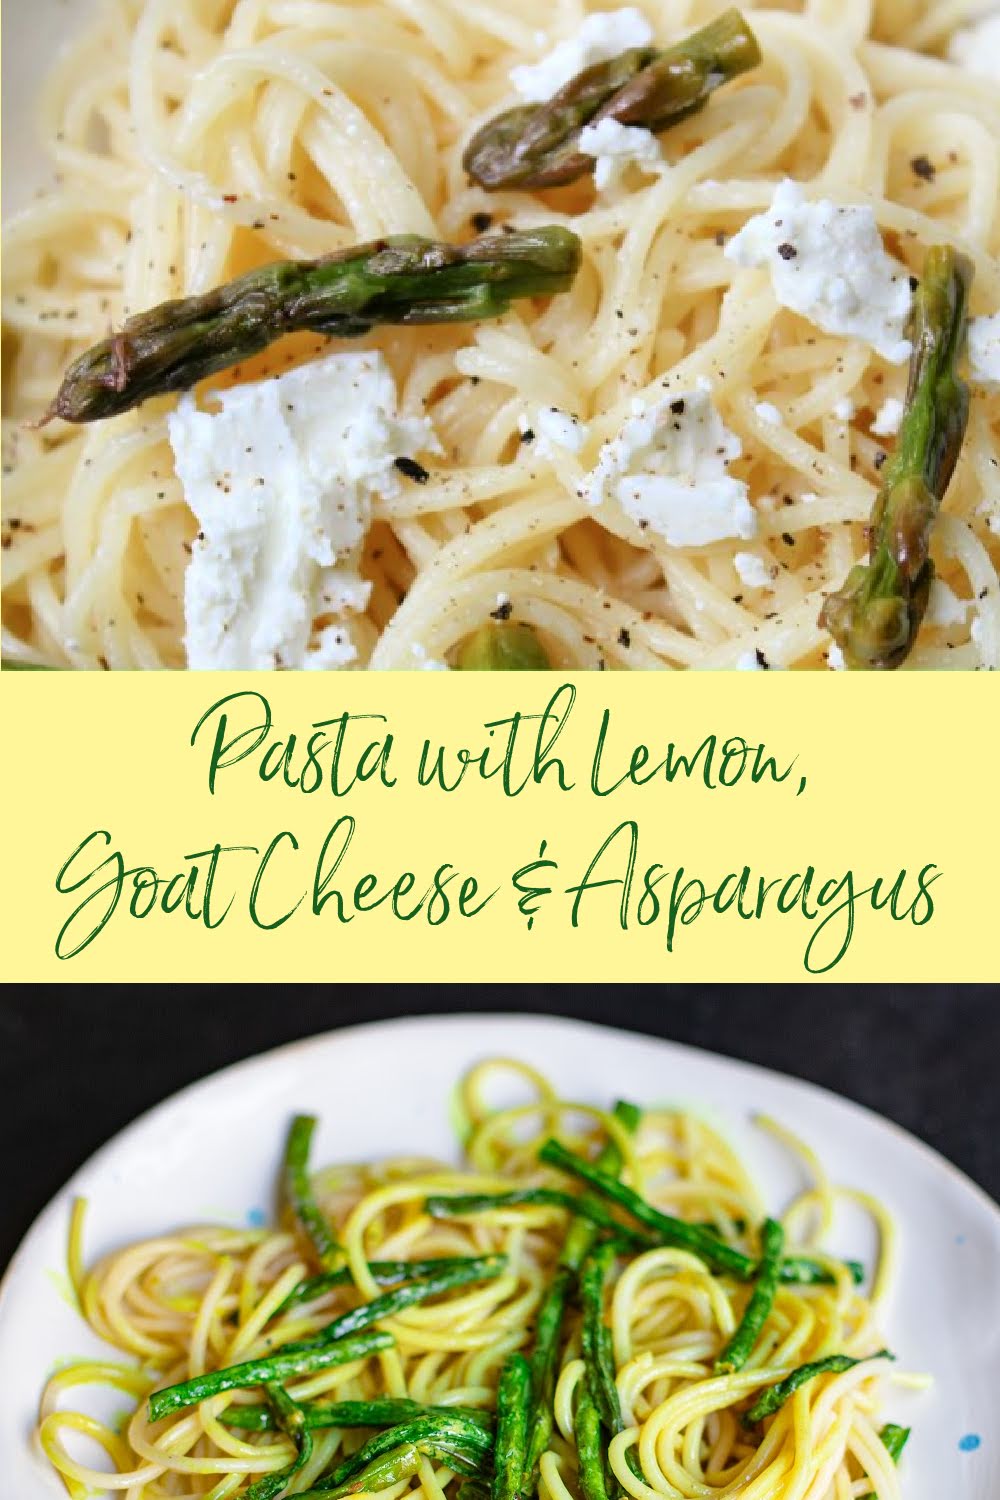 Pasta with goat cheese and asparagus on top.